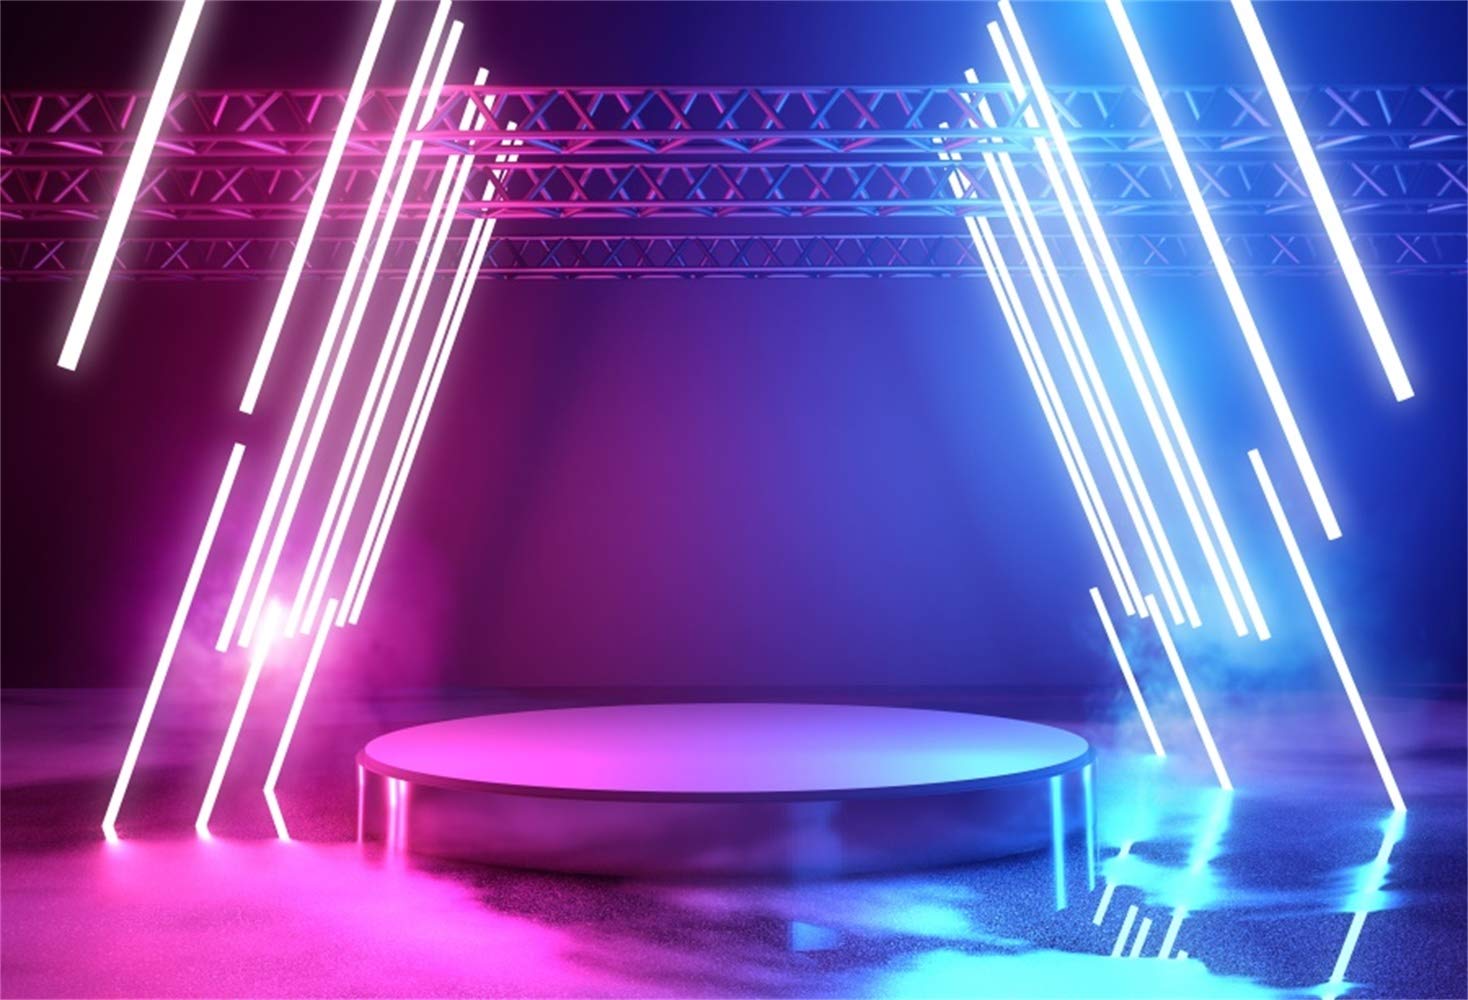 Amazon.com, Leowefowa 5x3ft Bright Neon Stage Nightview Backdrop Vinyl Pink Blue Neon Lights Futuristic Style Drama Stage Photography Background The 80 90's Disco Party Banner Studio Props